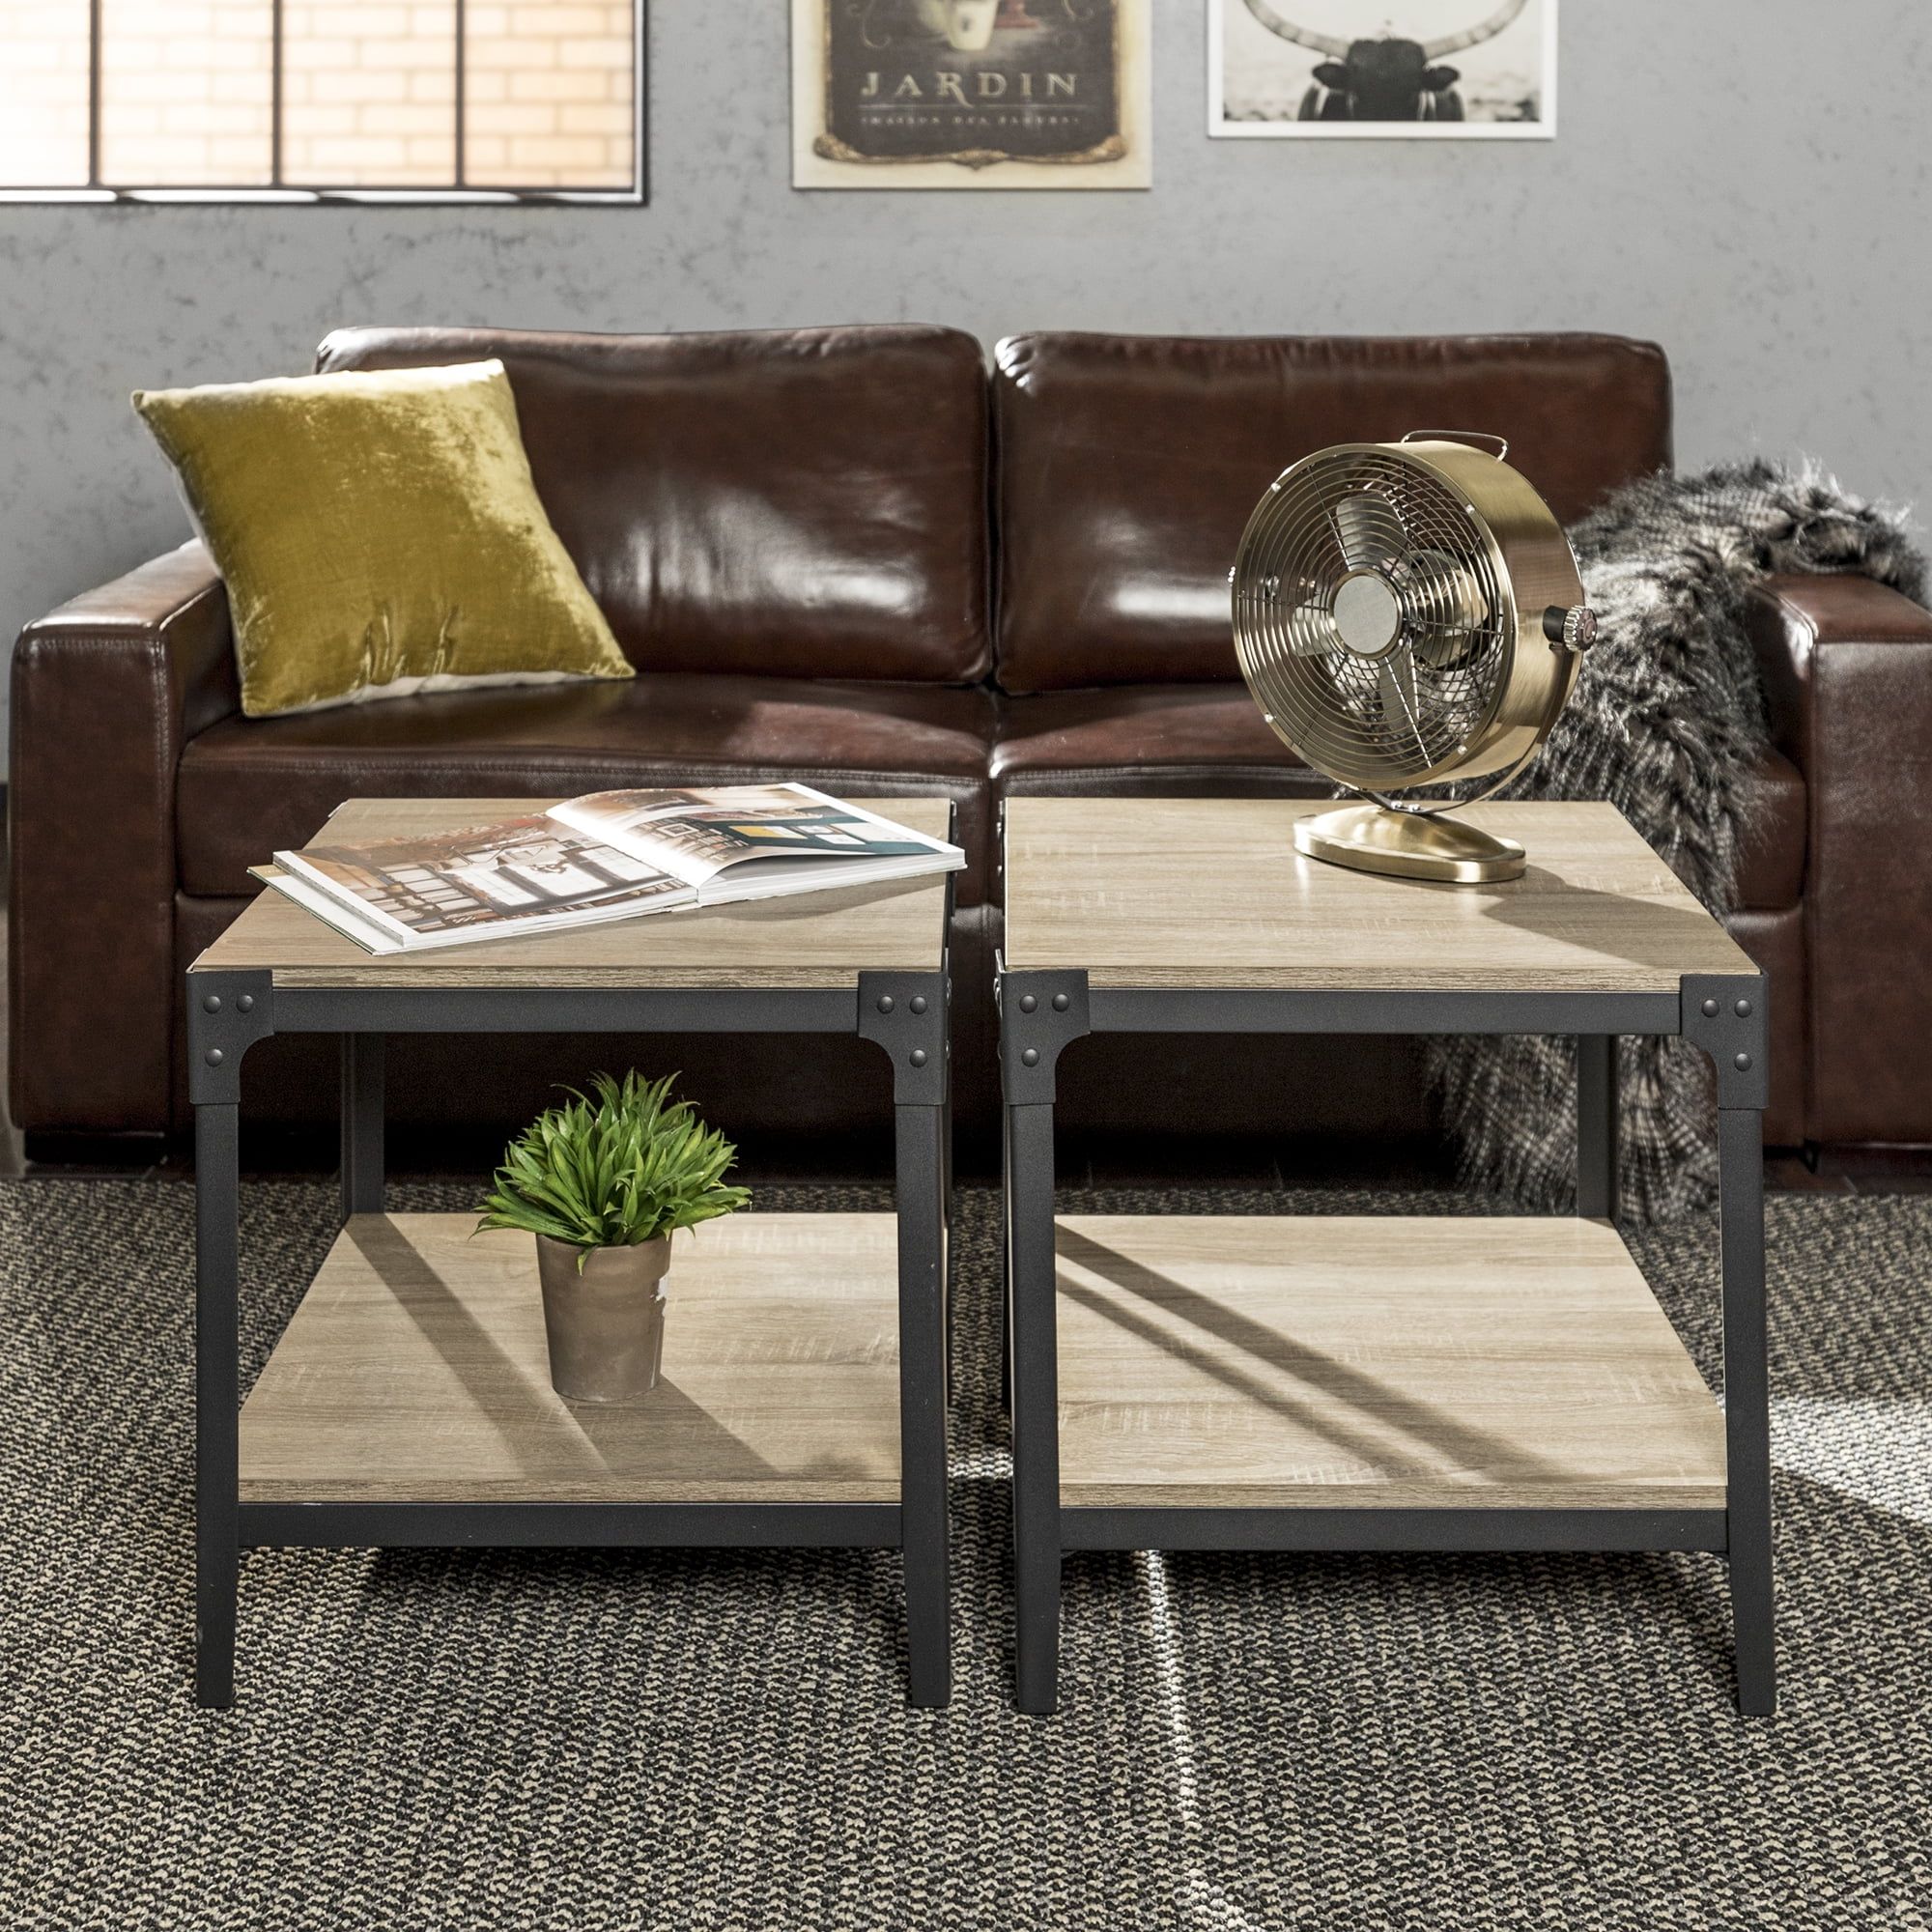 Woven Paths Wilson Riveted End Tables, Set Of 2, Driftwood – Walmart Throughout Woven Paths Coffee Tables (Gallery 15 of 20)